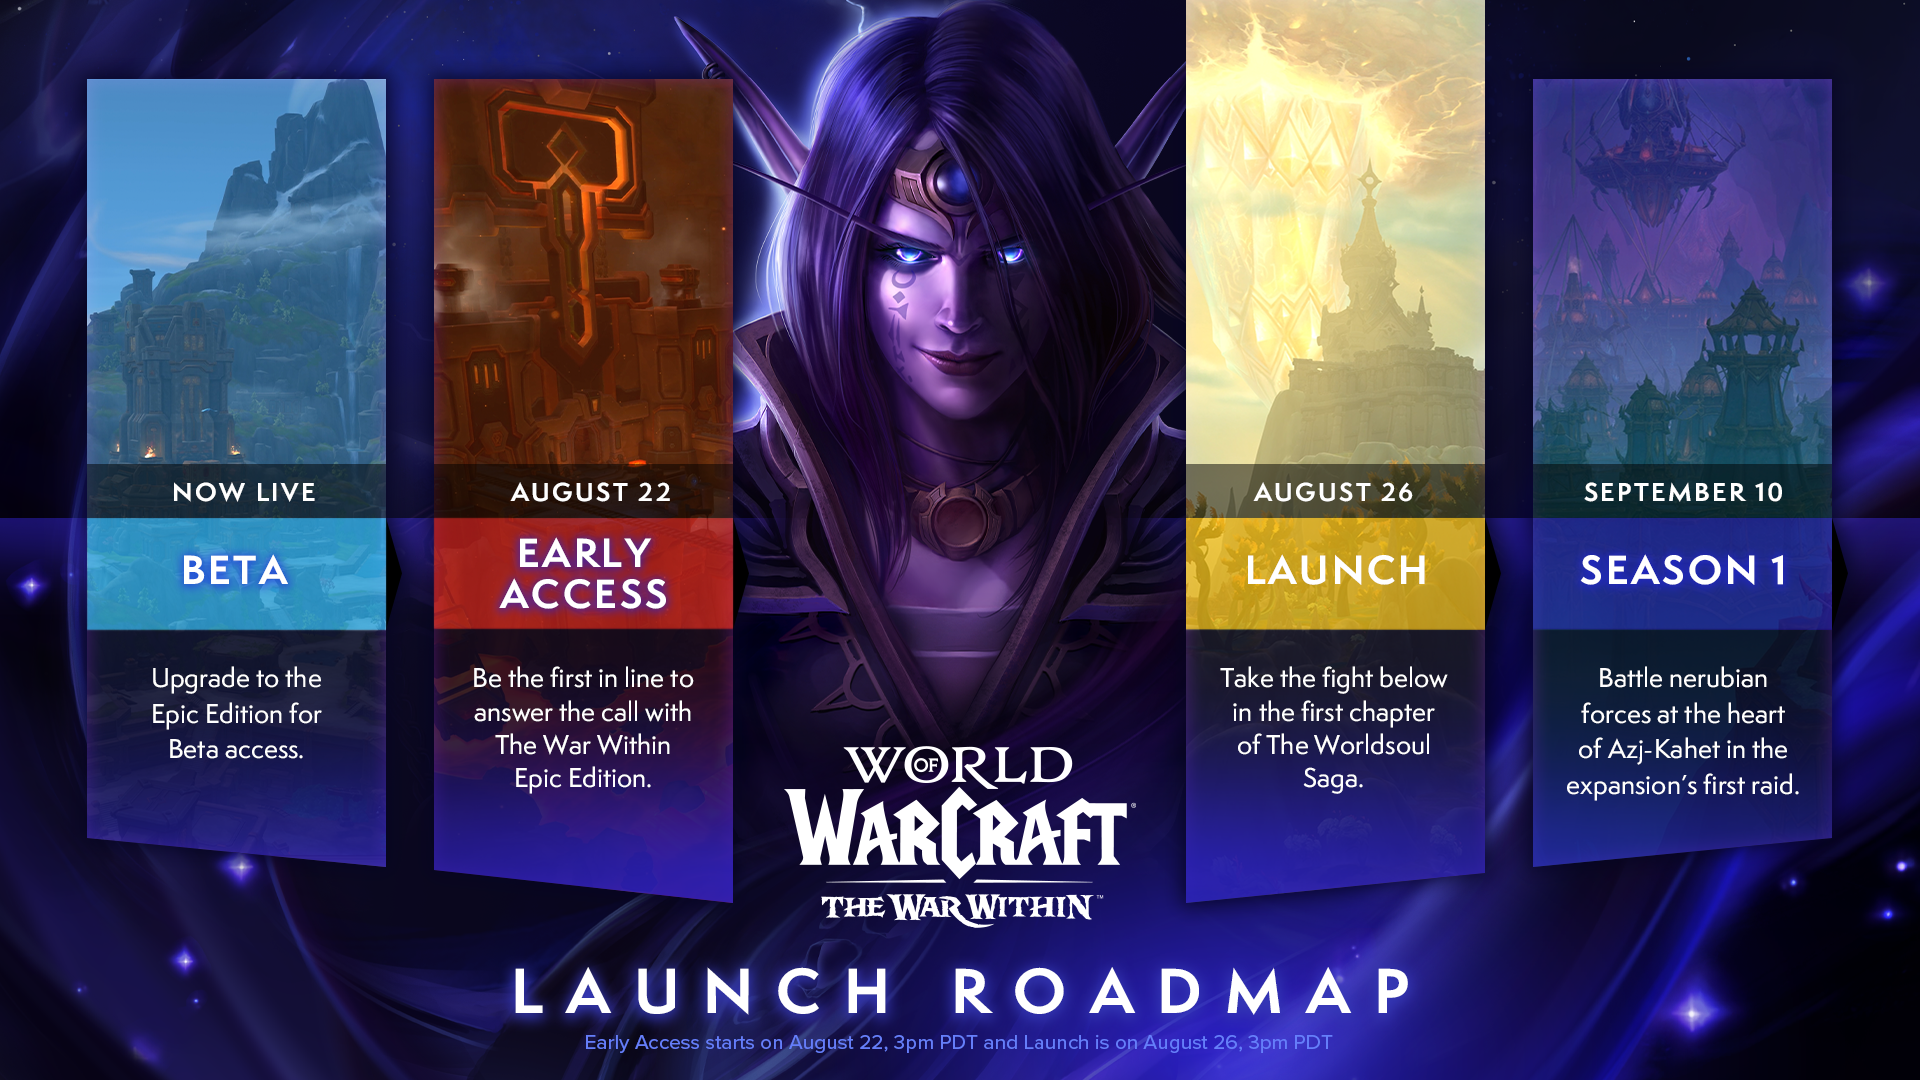 WoW_The_War_Within_Launch_Roadmap_1920x1080.png